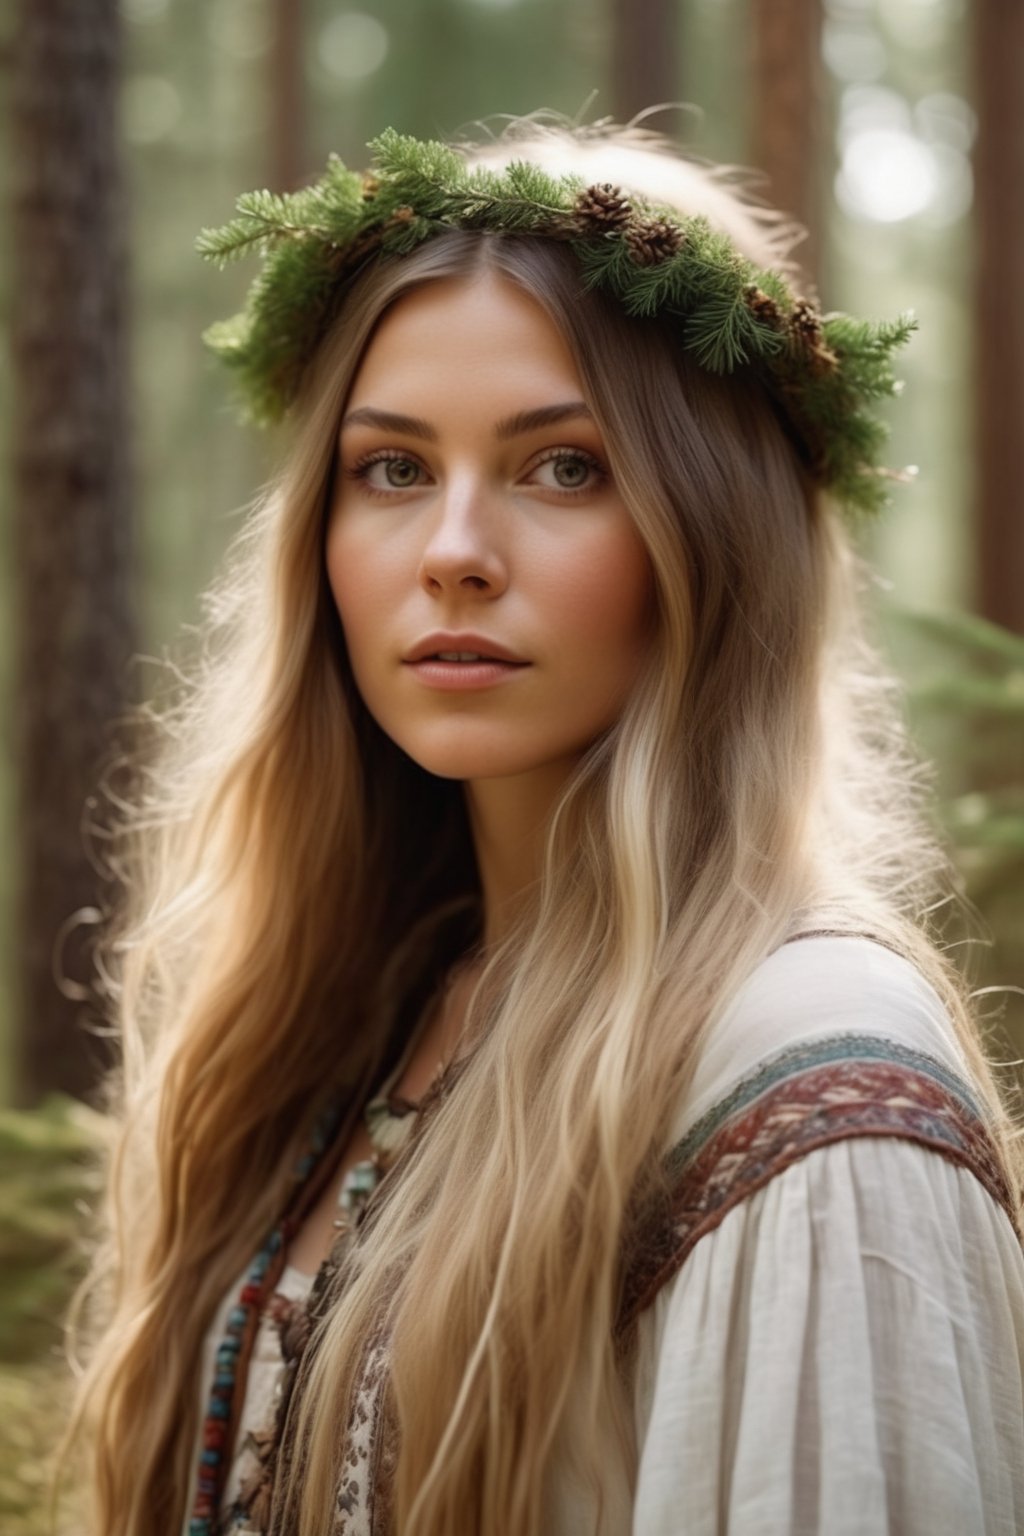 Generate hyper realistic image of a bohemian and nature-loving Scandinavian woman with long,flowing hair,wearing an ethereal and earthy outfit,exploring a serene forest with tall pine trees and picturesque landscapes.Extremely Realistic,up close